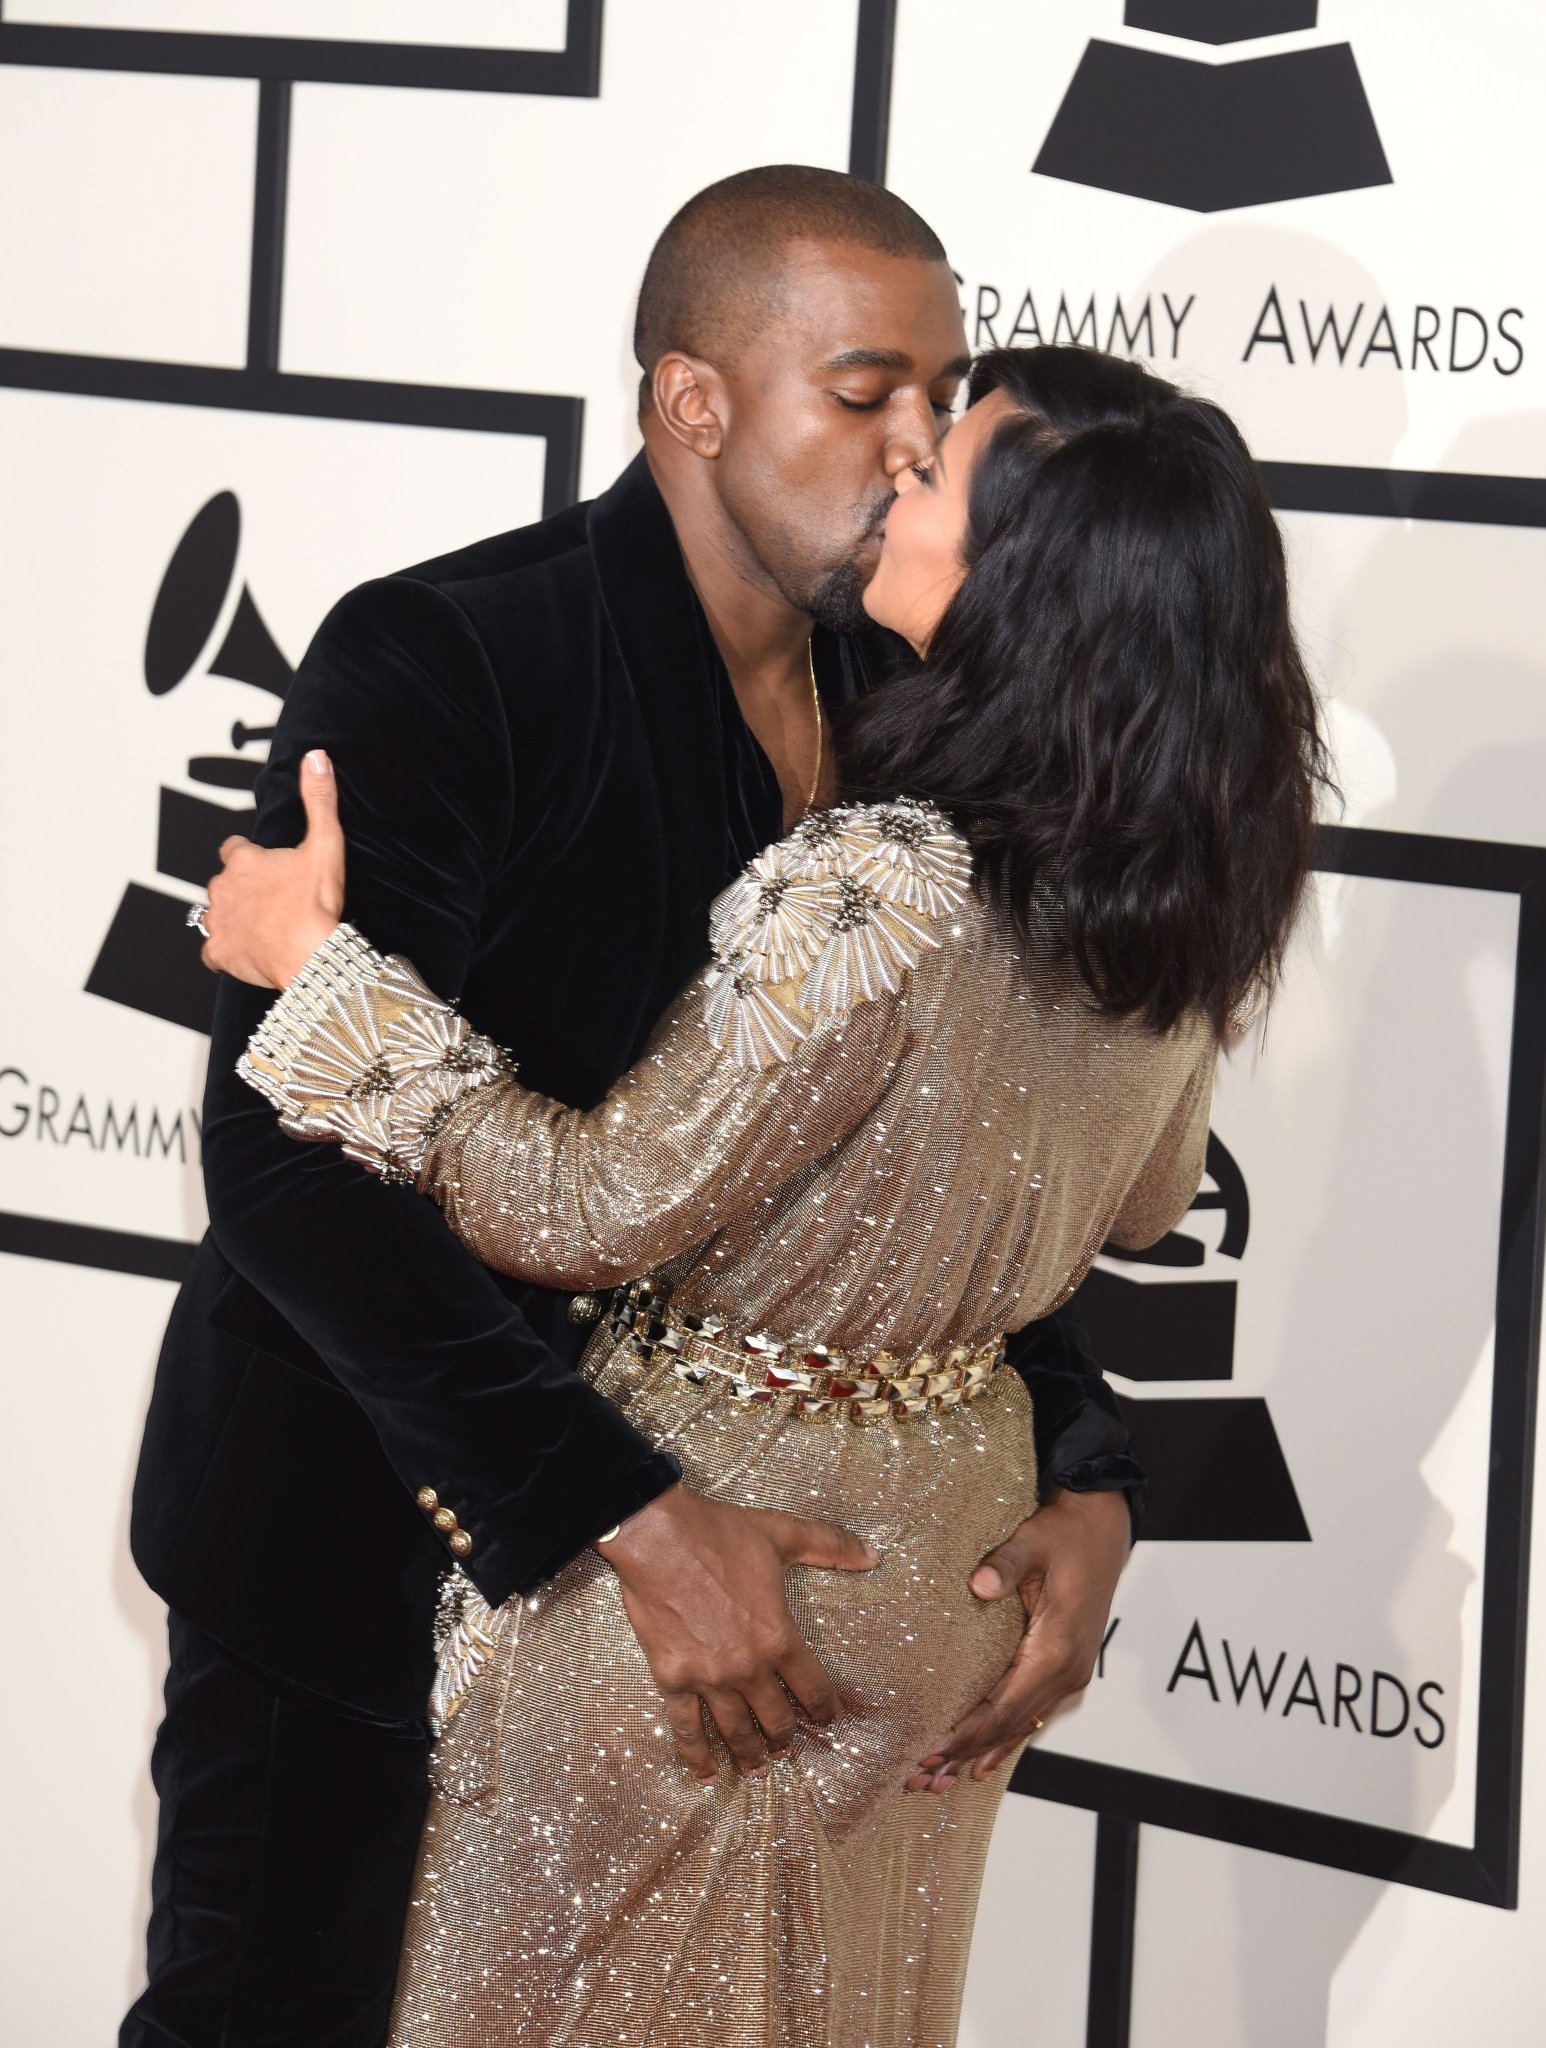 9 Celebrity Couples Who Show Too Much PDA